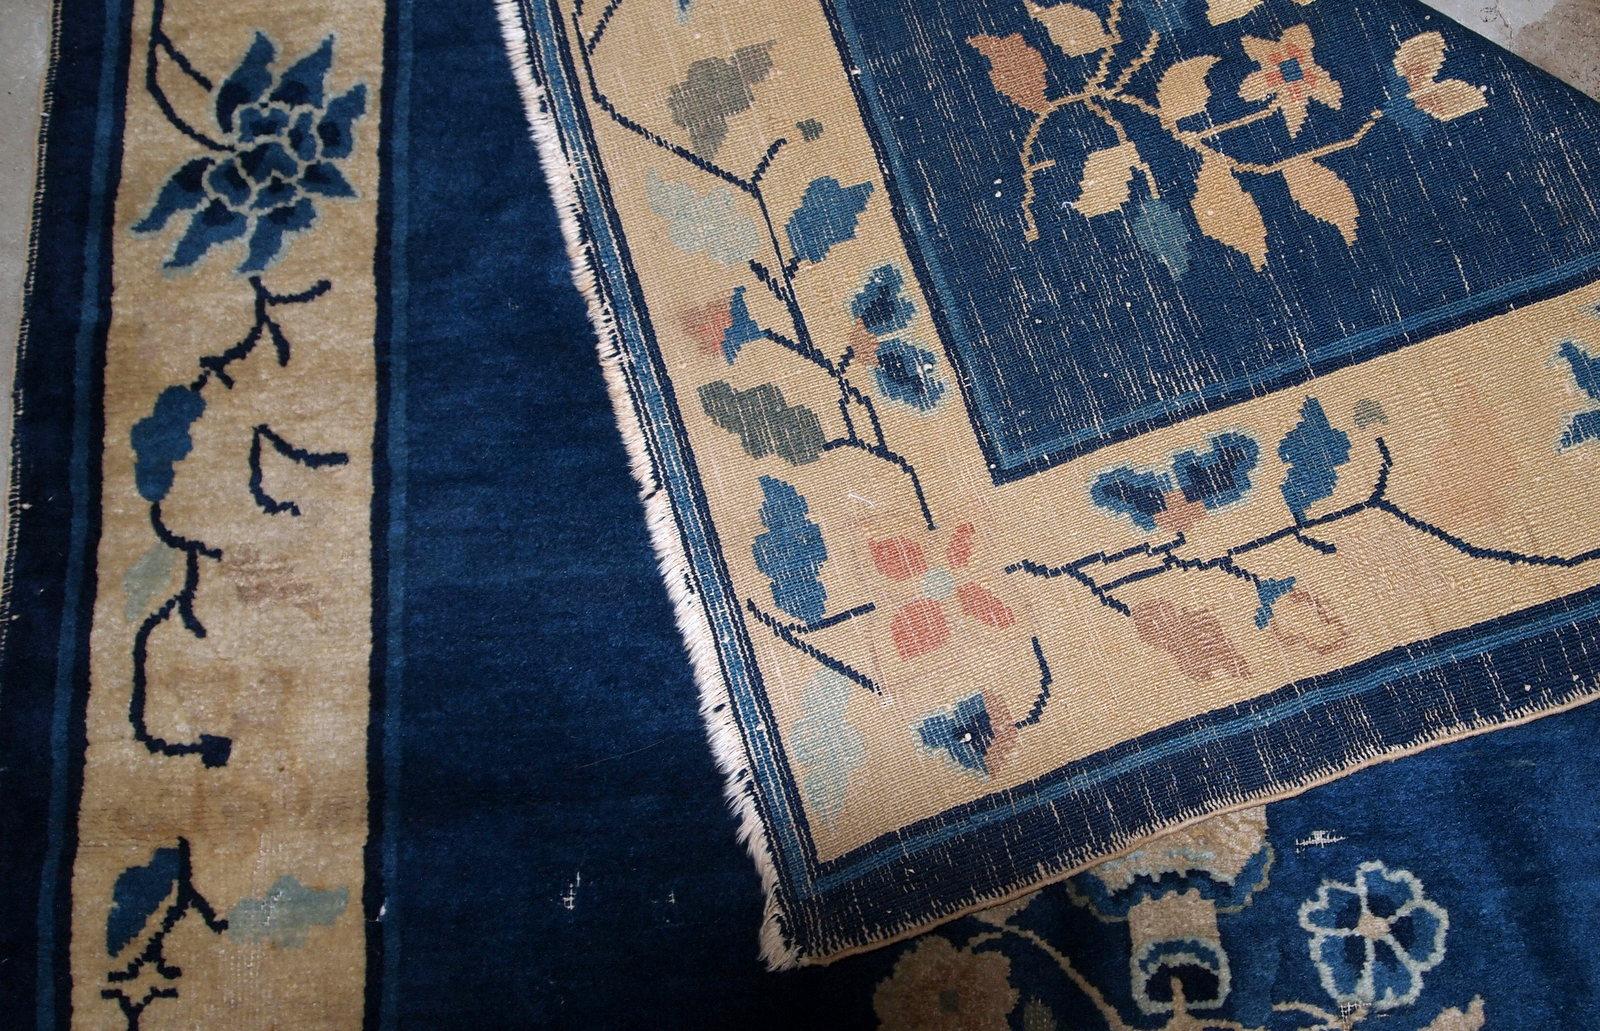 Handmade antique rug from Beijing, China, made in blue wool. The rug is in original condition, has some age wear. It is from the 1900s.

- Condition: original, some age wear,

- circa 1900s,

- Size: 4.1' x 6.4' (125cm x 195cm),

- Material: